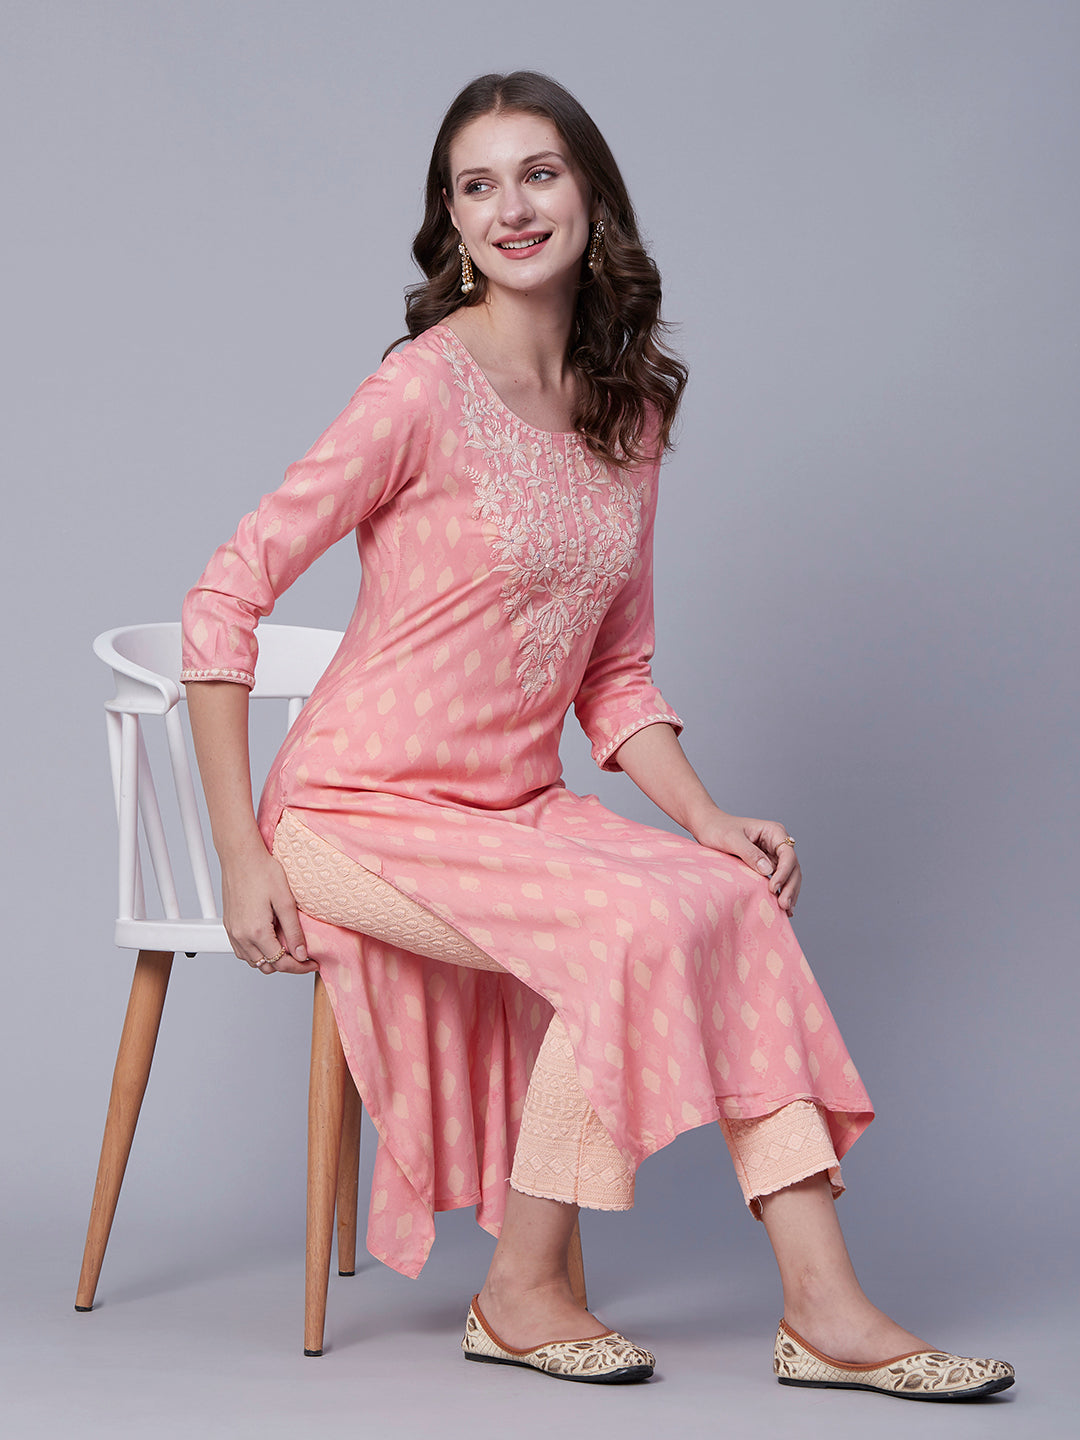 Abstract Printed Resham & Sequins Floral Embroidered Kurta - Peach Pink